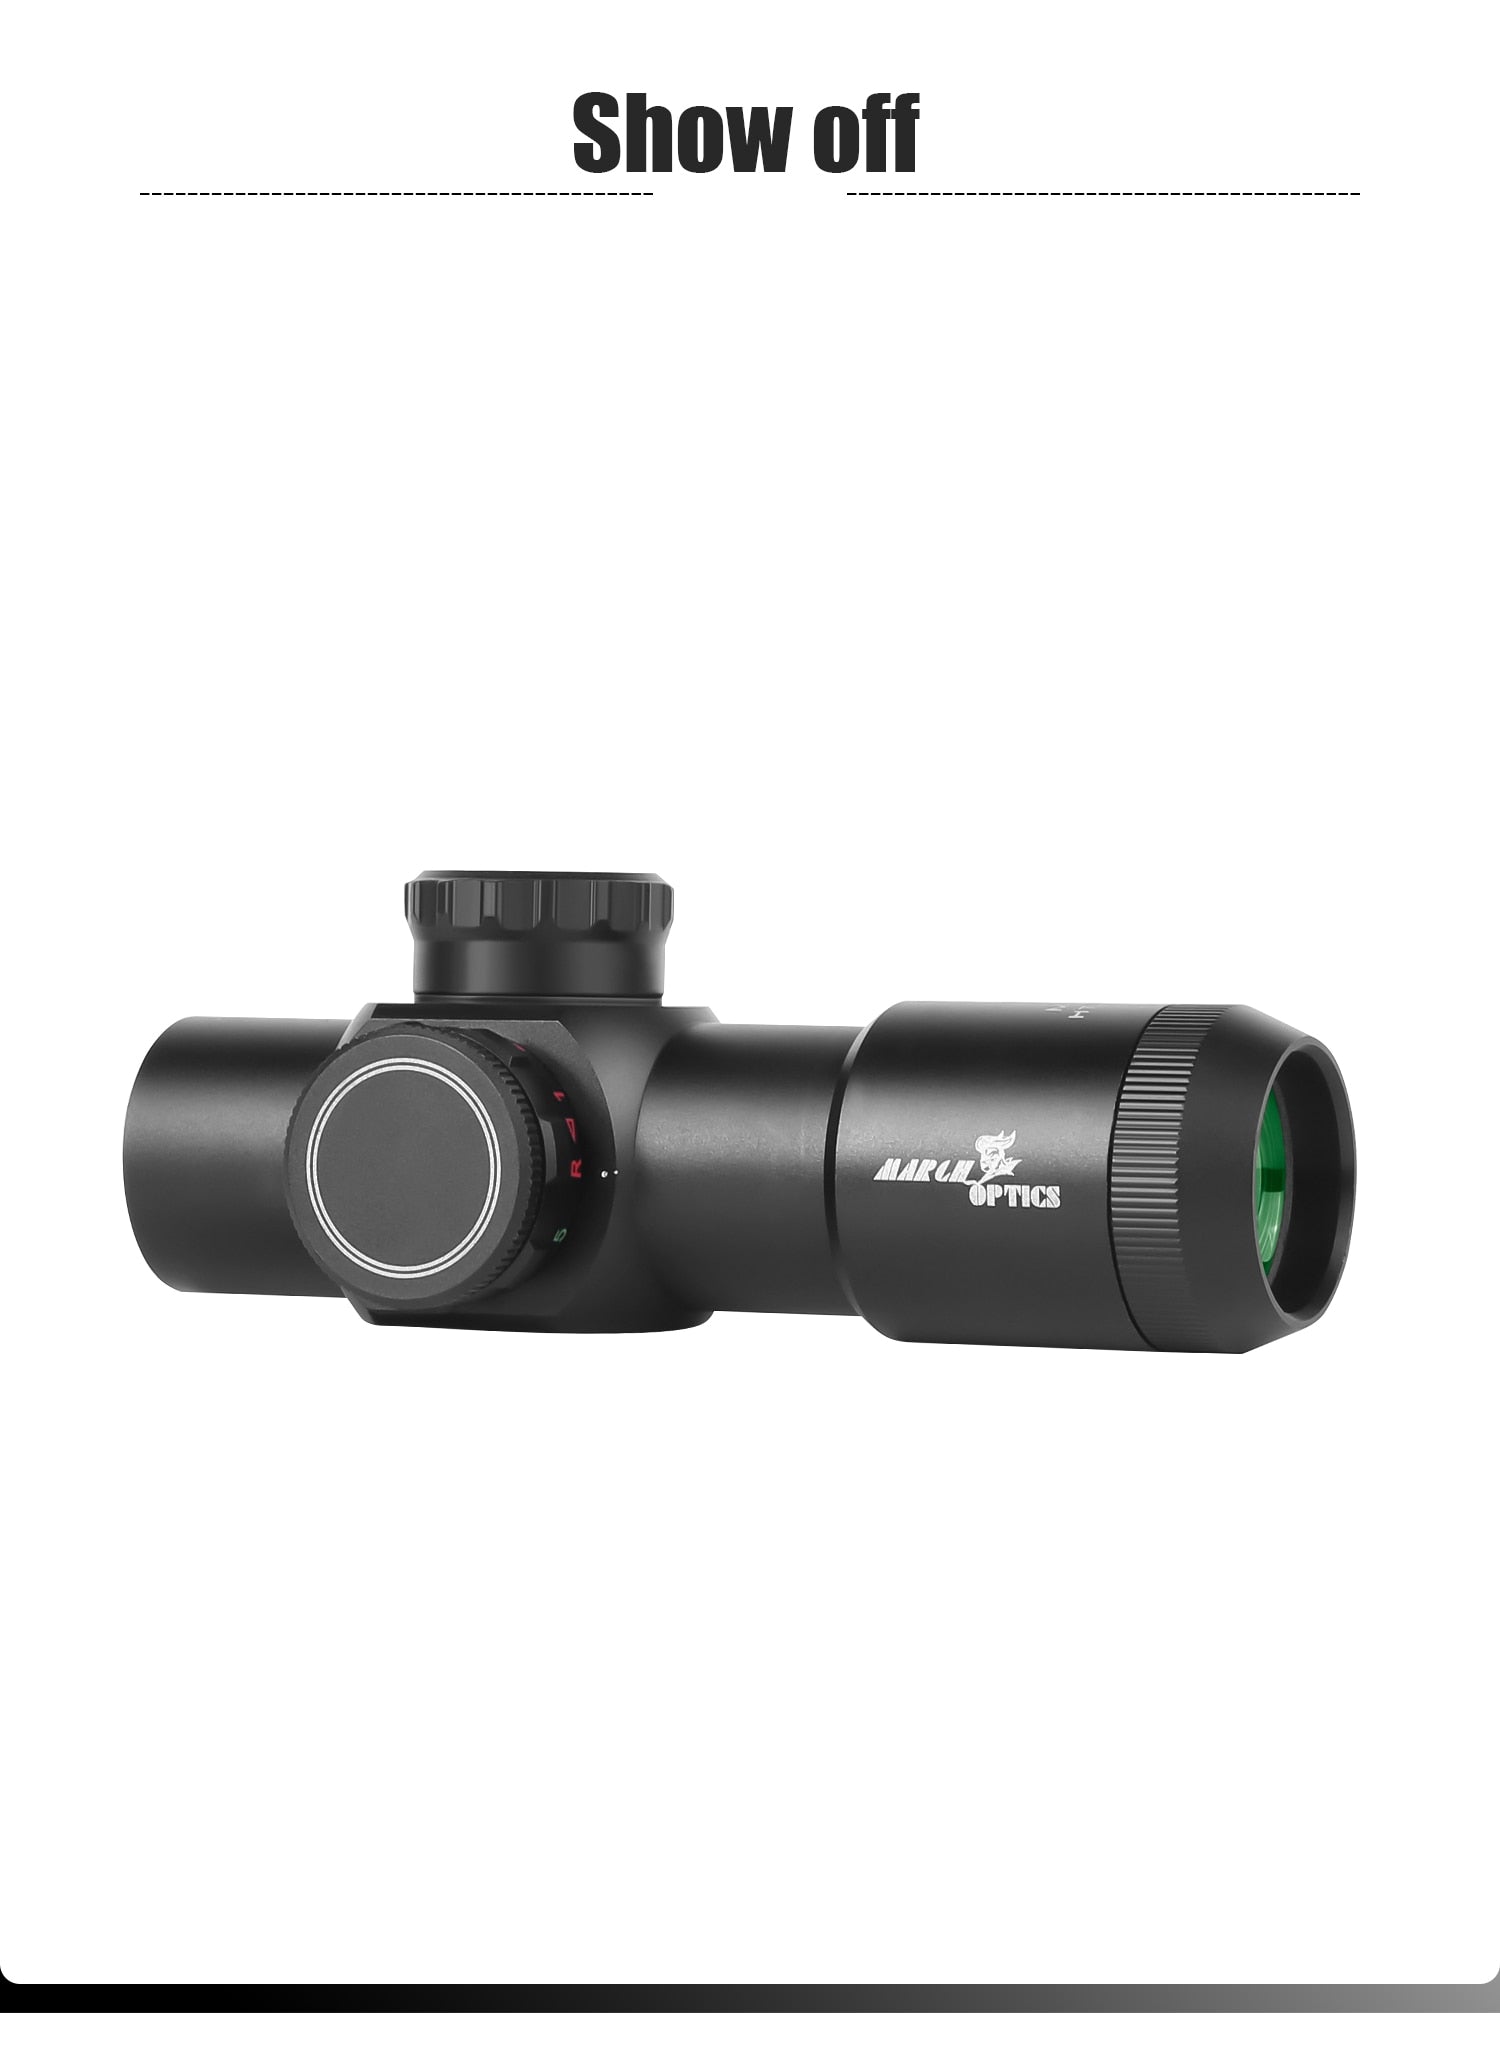 Eminent H3x28IR Fixed Optic Short Rifle Scope Sight Green Red Rifle Scope for Hunting Sniper Airsoft Air Guns Red Dot With Mounts - Eminent Paintball And Airsoft